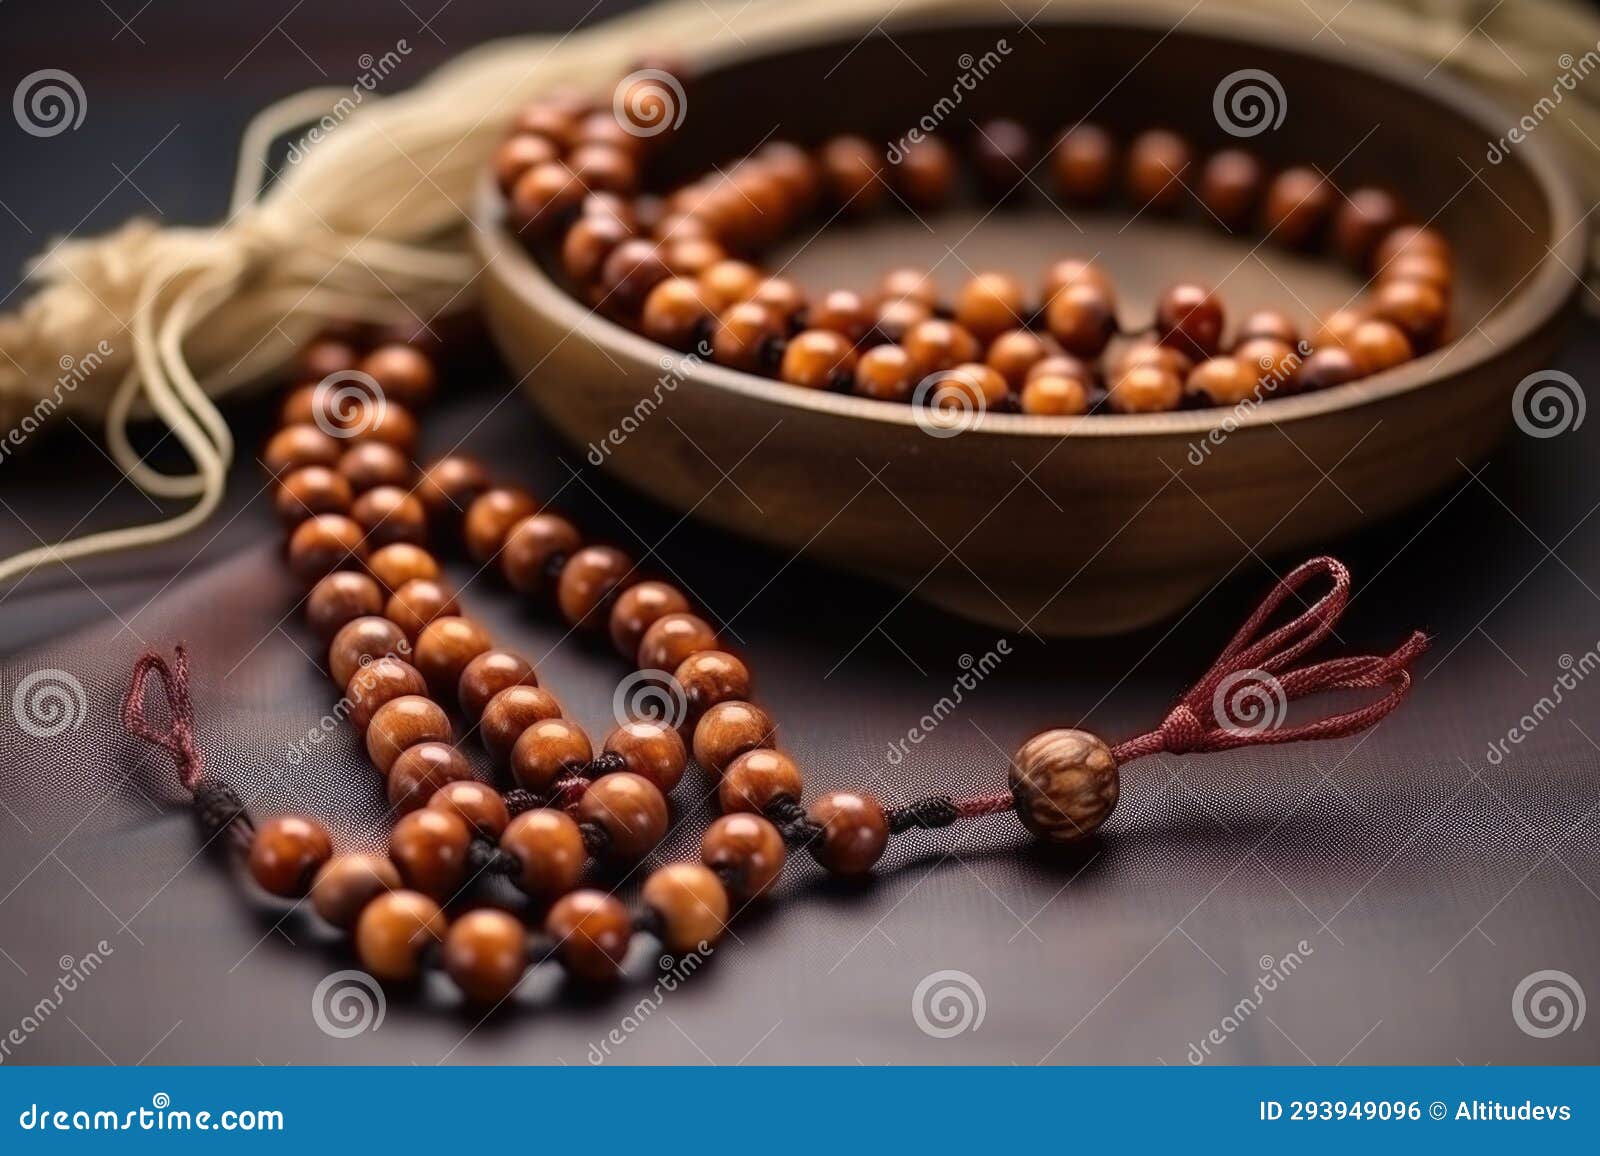 close-up of sparse wood beads, accessories for qi gong